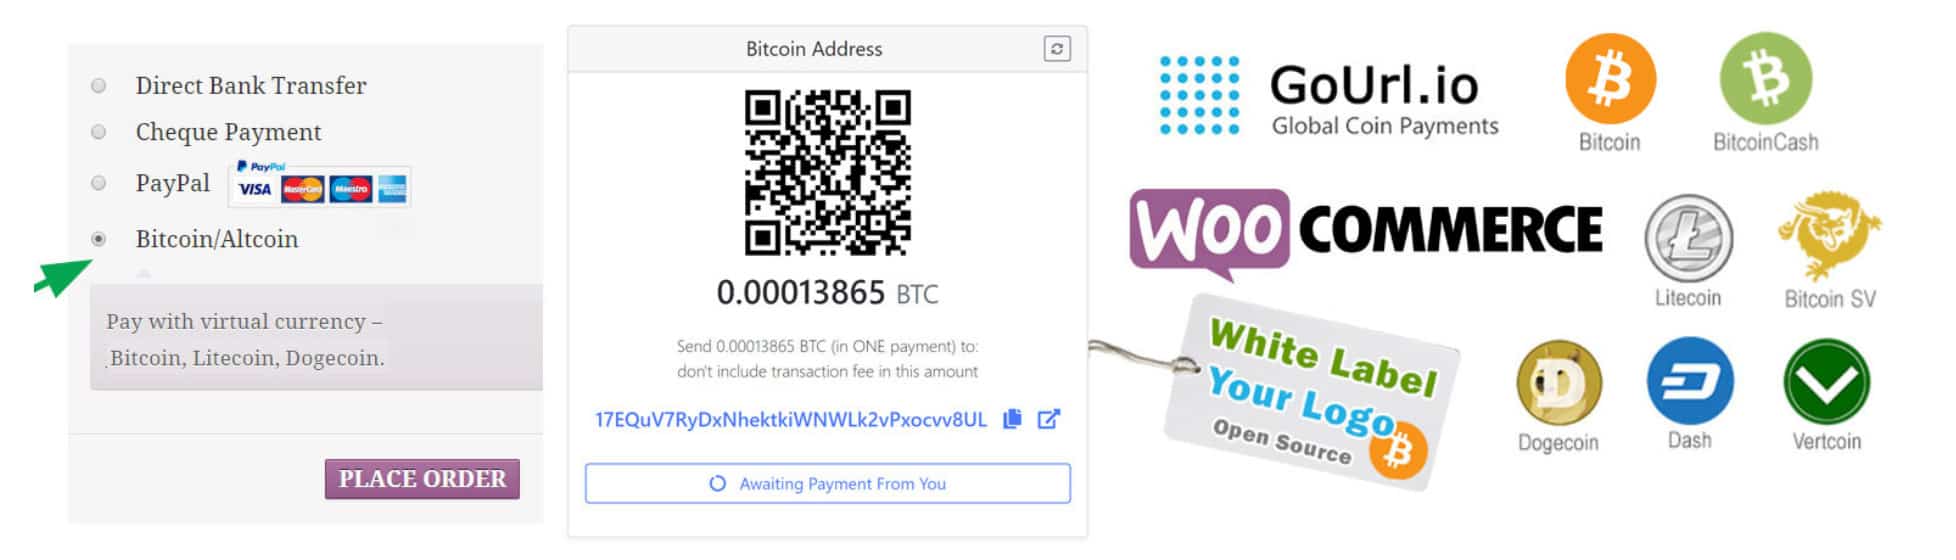 TheeCommerce Bitcoin Payment Gateway GoURL